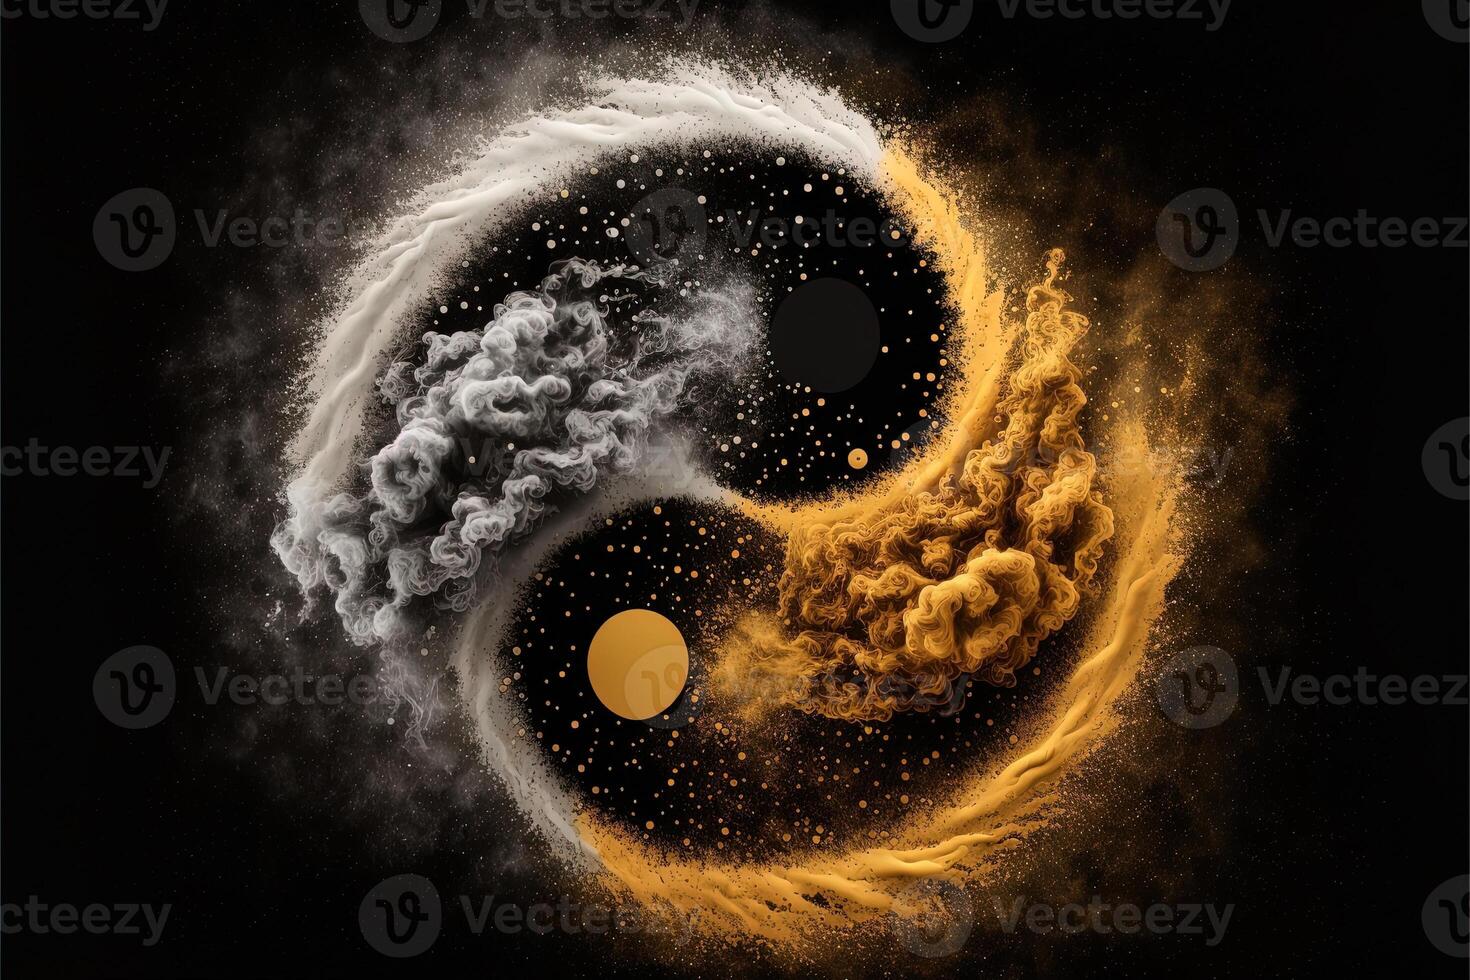 Golden and black yin yang symbol with floating powder on black background. abstraction, Buddhism, Hinduism, symbol, religion, balance concept. photo